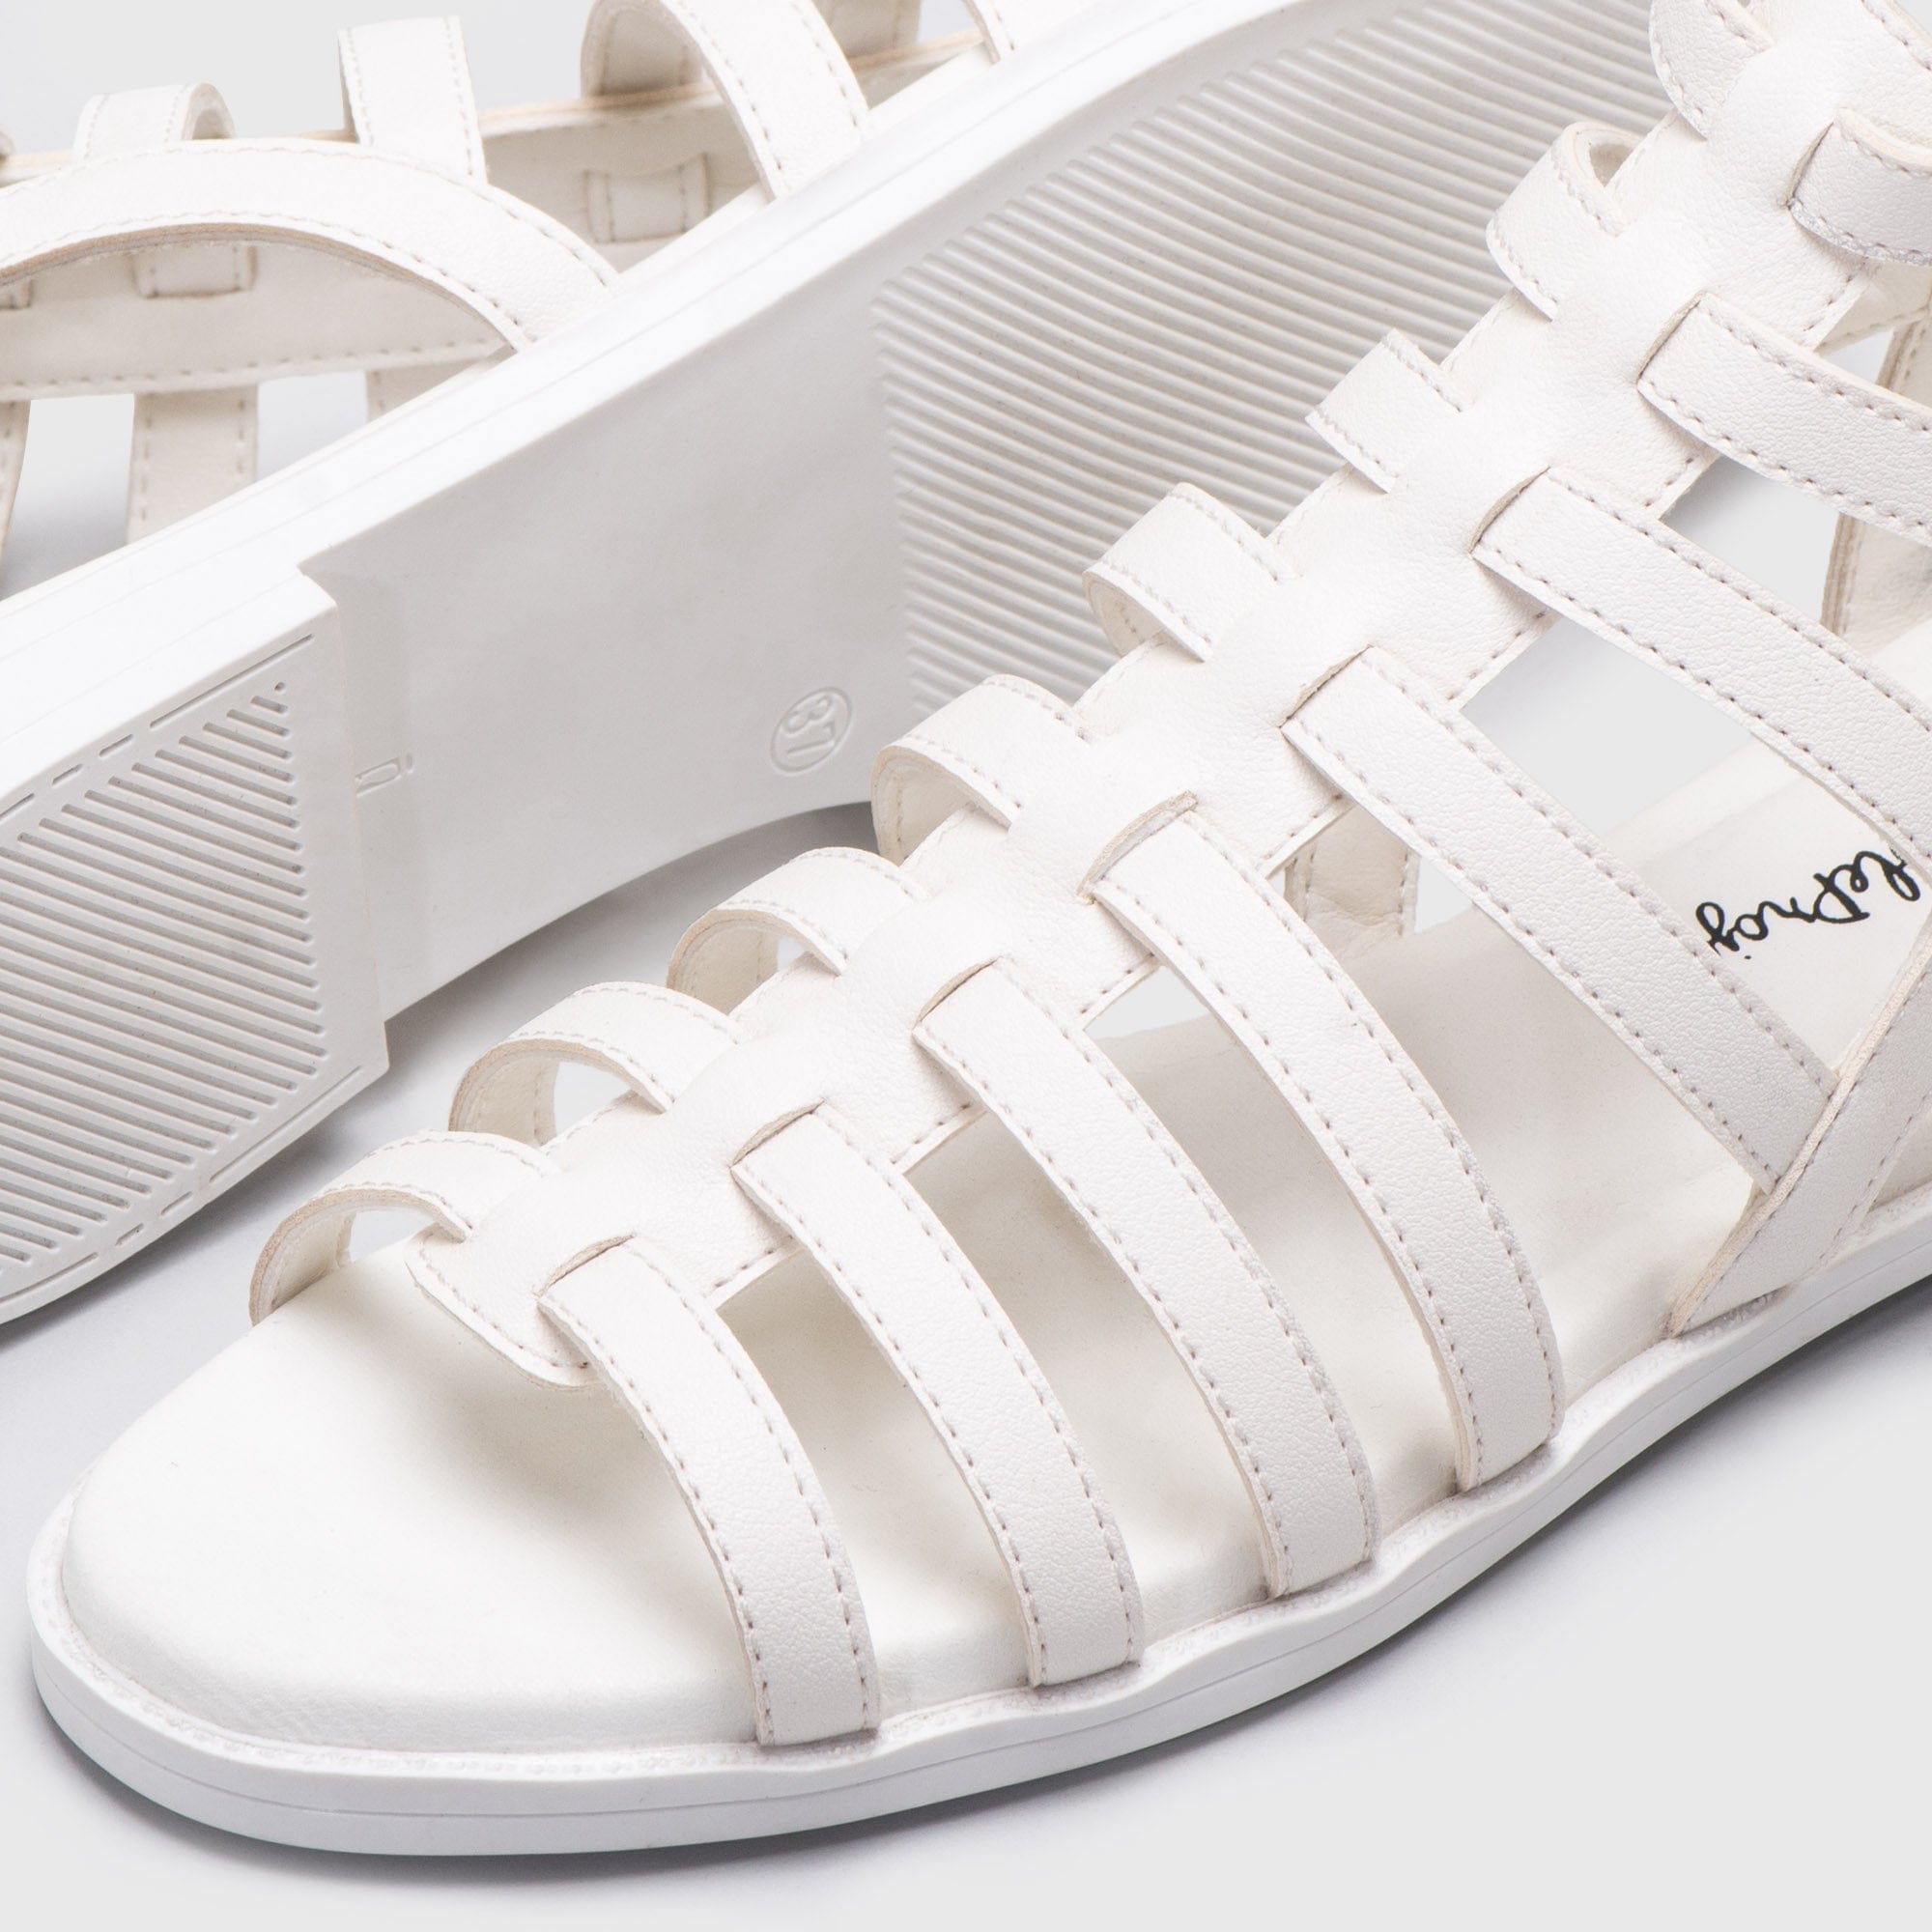 Adorable Projects Official Adorableprojects - Faresta Sandals White - Sendal Gladiator